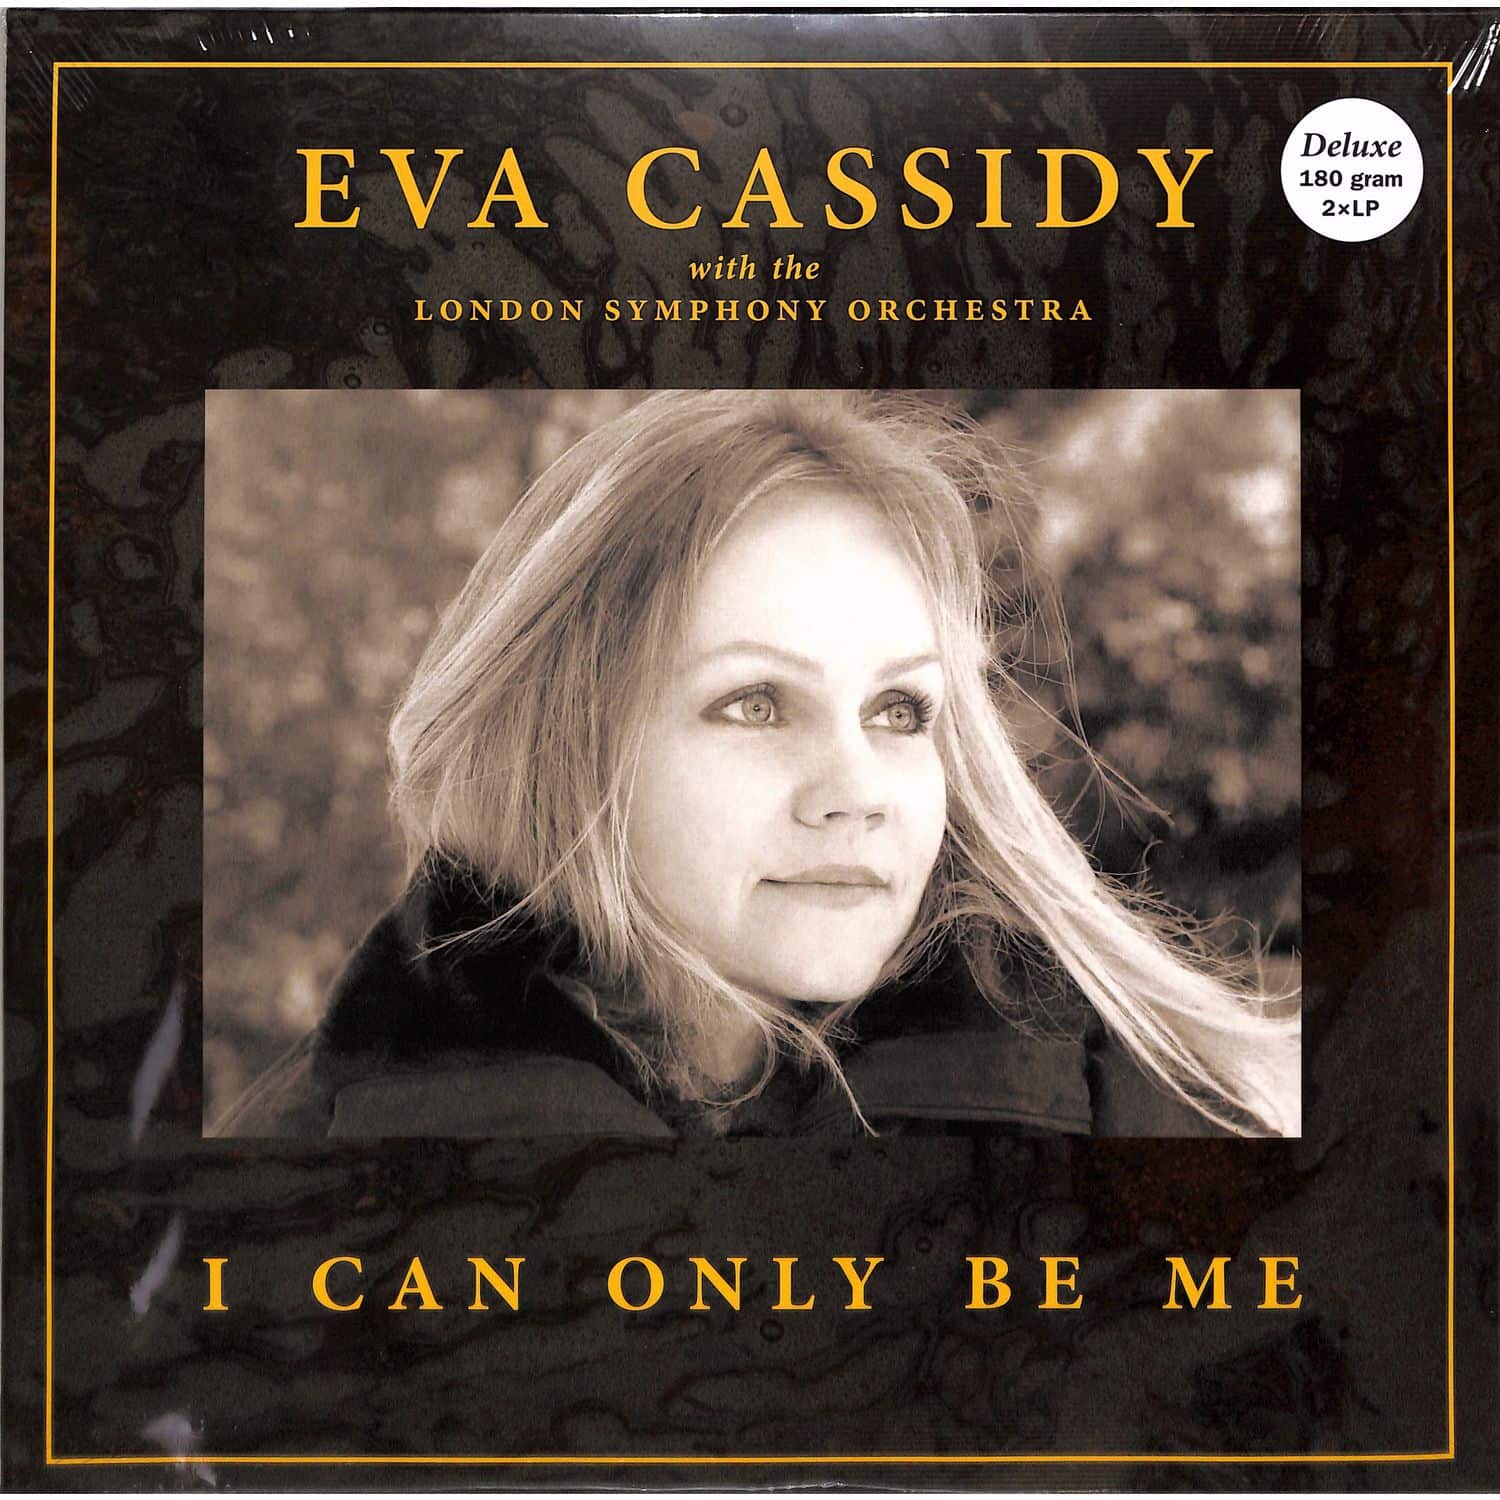 Eva Cassidy with the London Symphony Orchestra - I CAN ONLY BE ME 